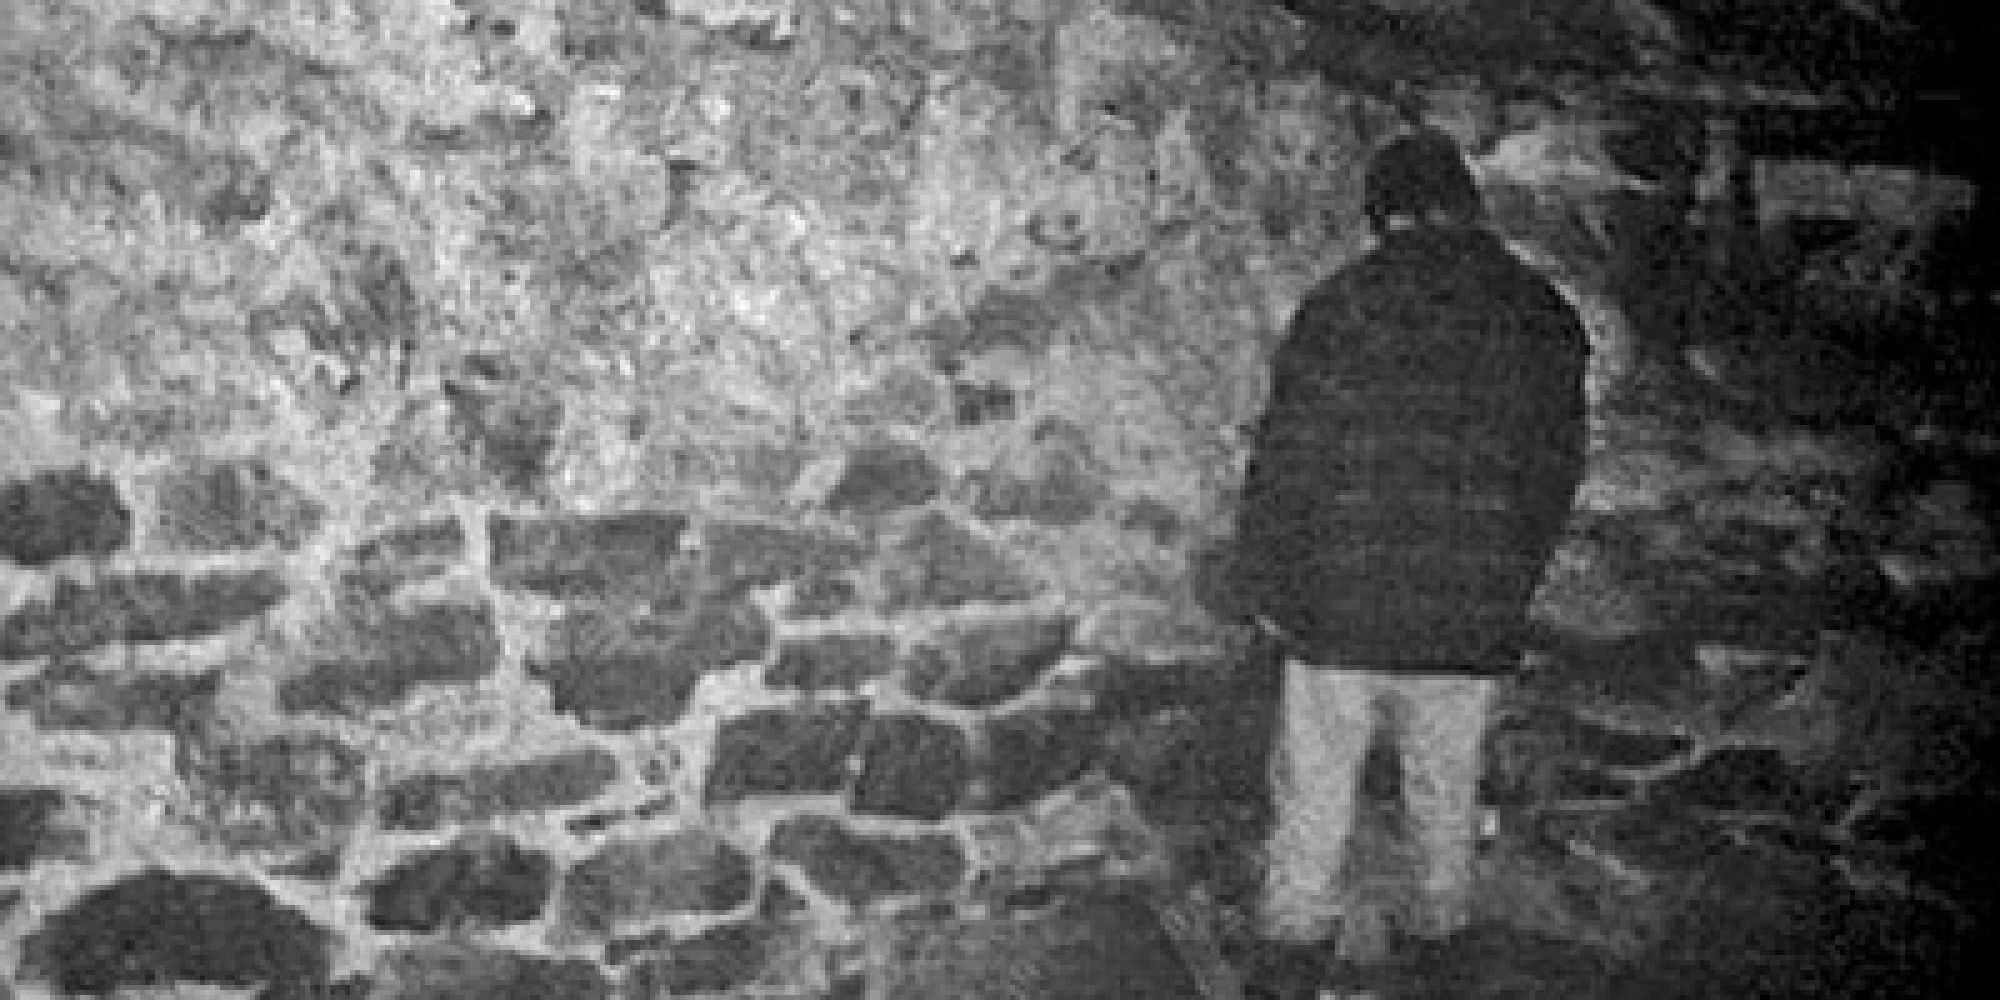 Josh standing in the corner of the witch's house